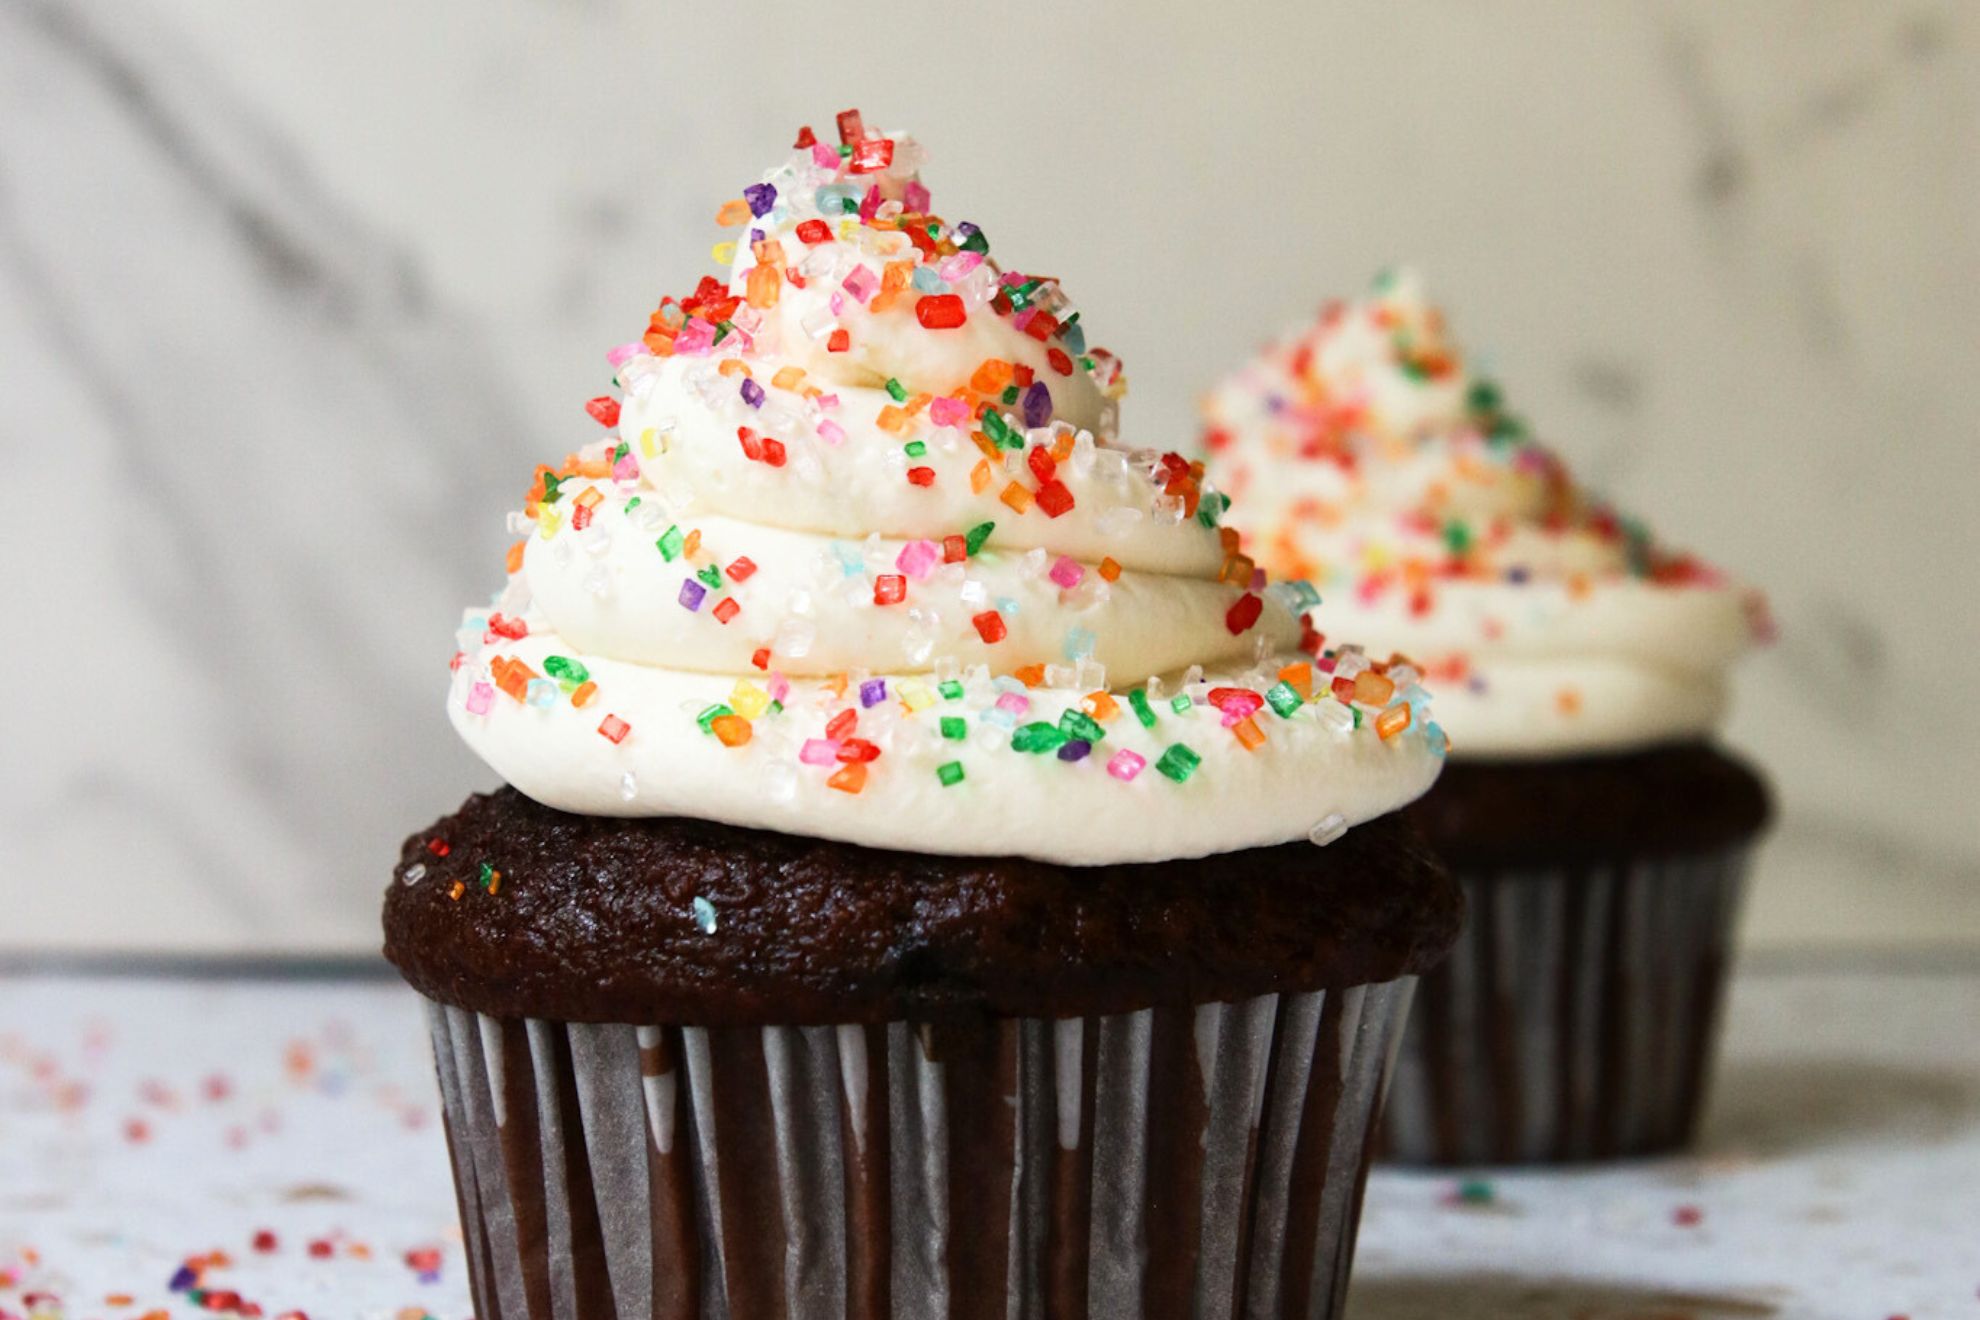 This is a horizontal image looking at a chocolate cupcake from the side. The image focuses on the swirl of vanilla frosting on top of the cupcake. The frosting has rainbow sugar sprinkles on it. Another cupcake is blurred in the background.